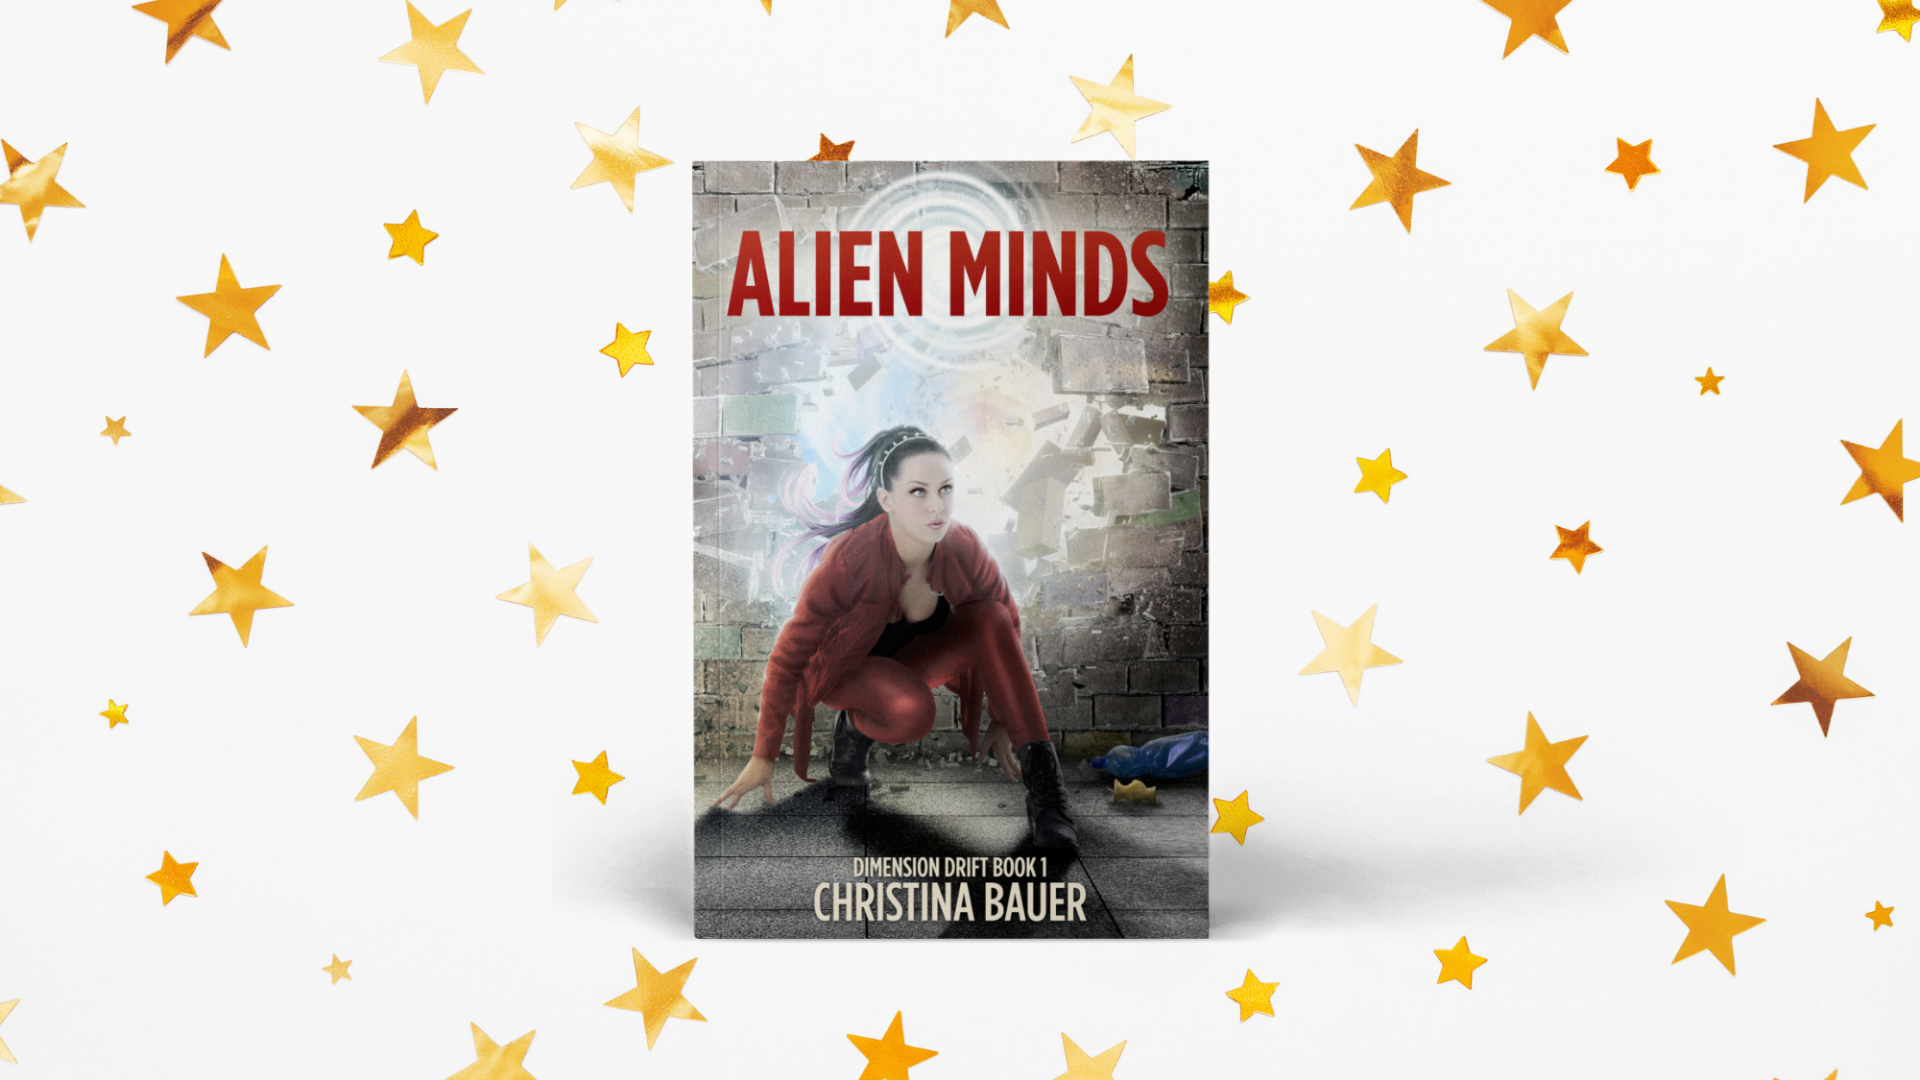 ALIEN MINDS is here!